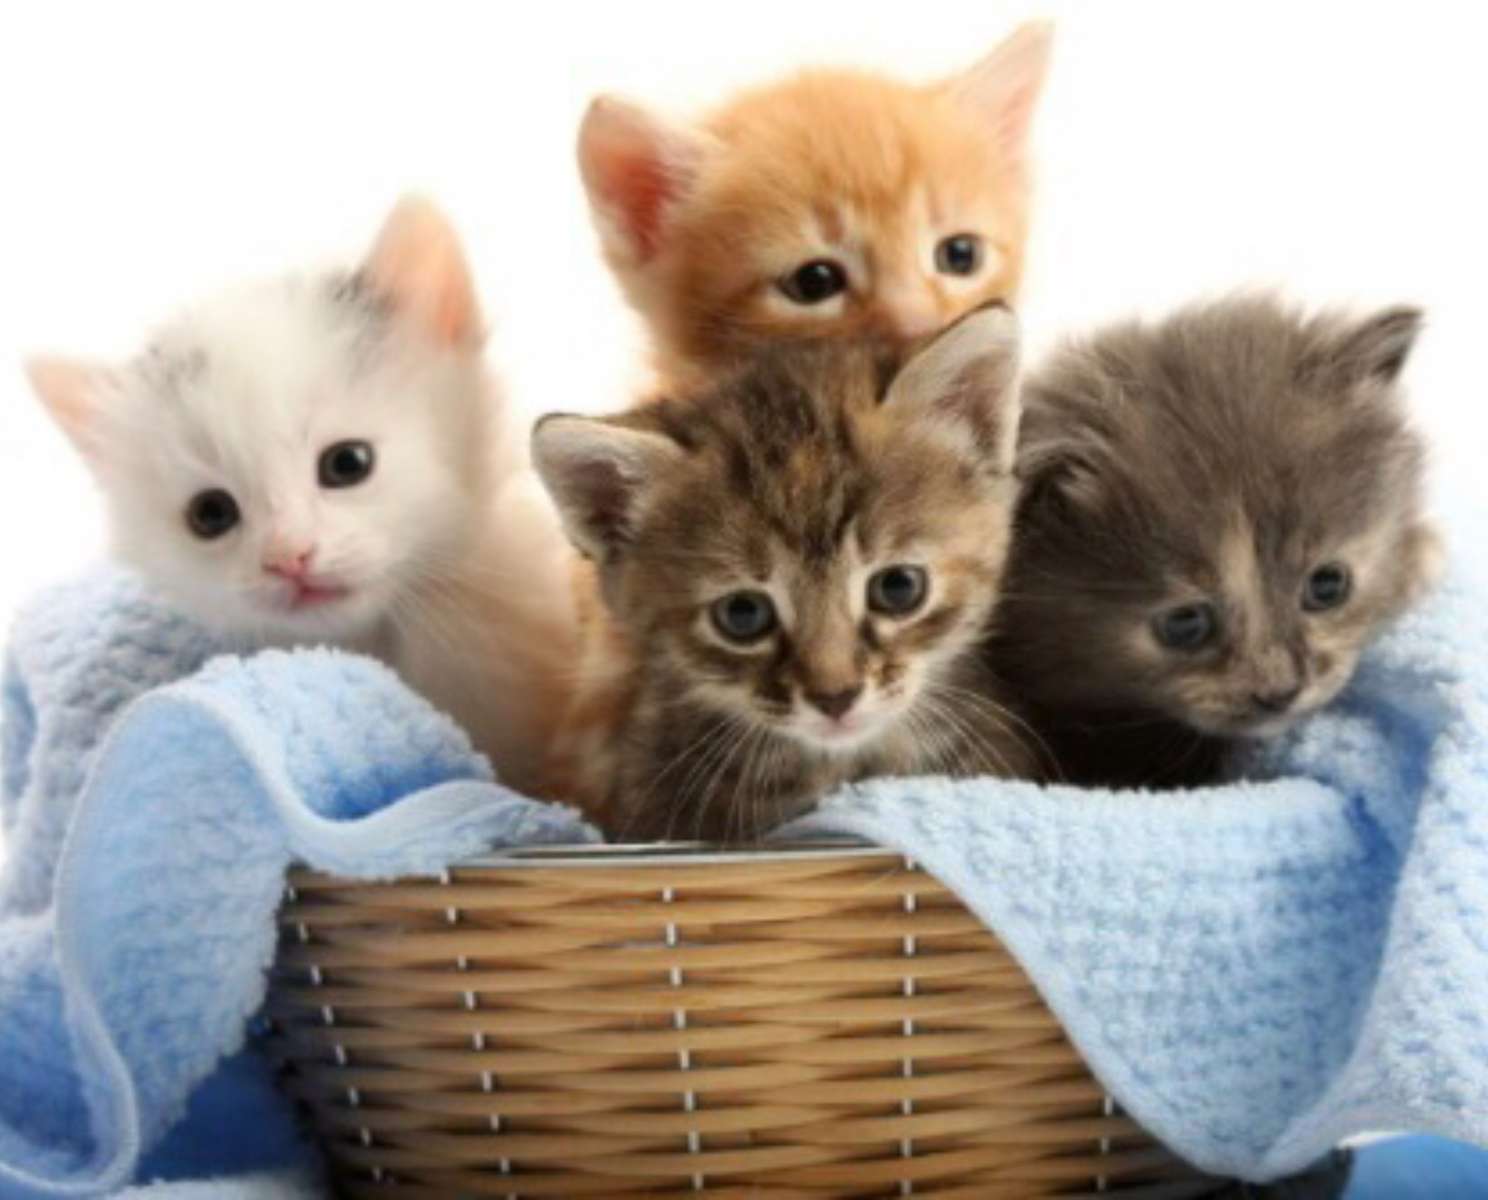 Kittens in een mand❤️❤️❤️❤️❤️❤️ online puzzel